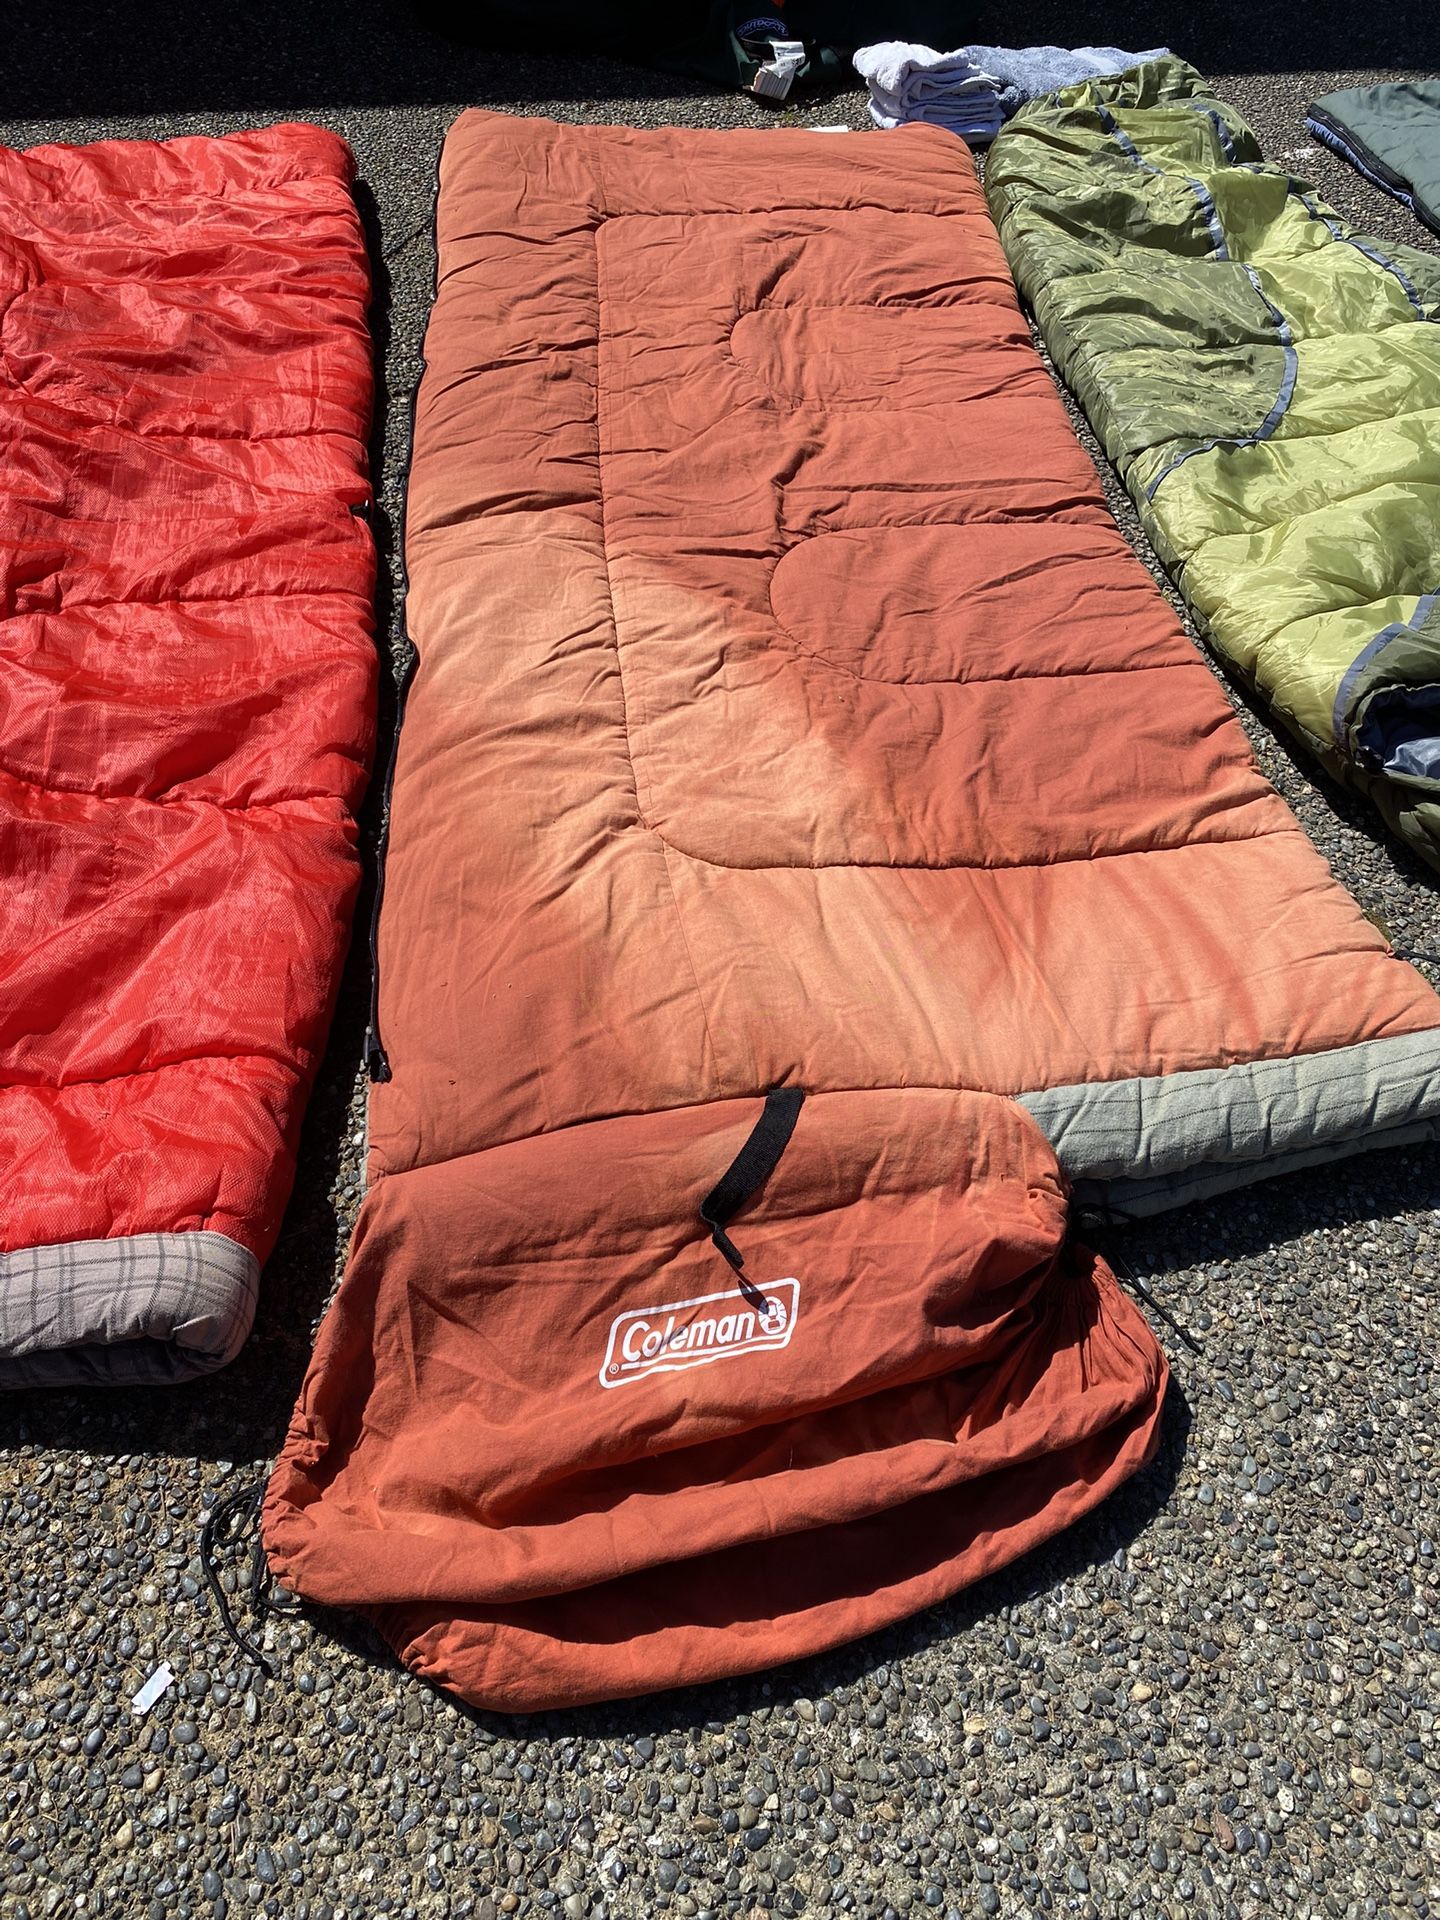 Sleeping Bags Must Go!  30 For All!!